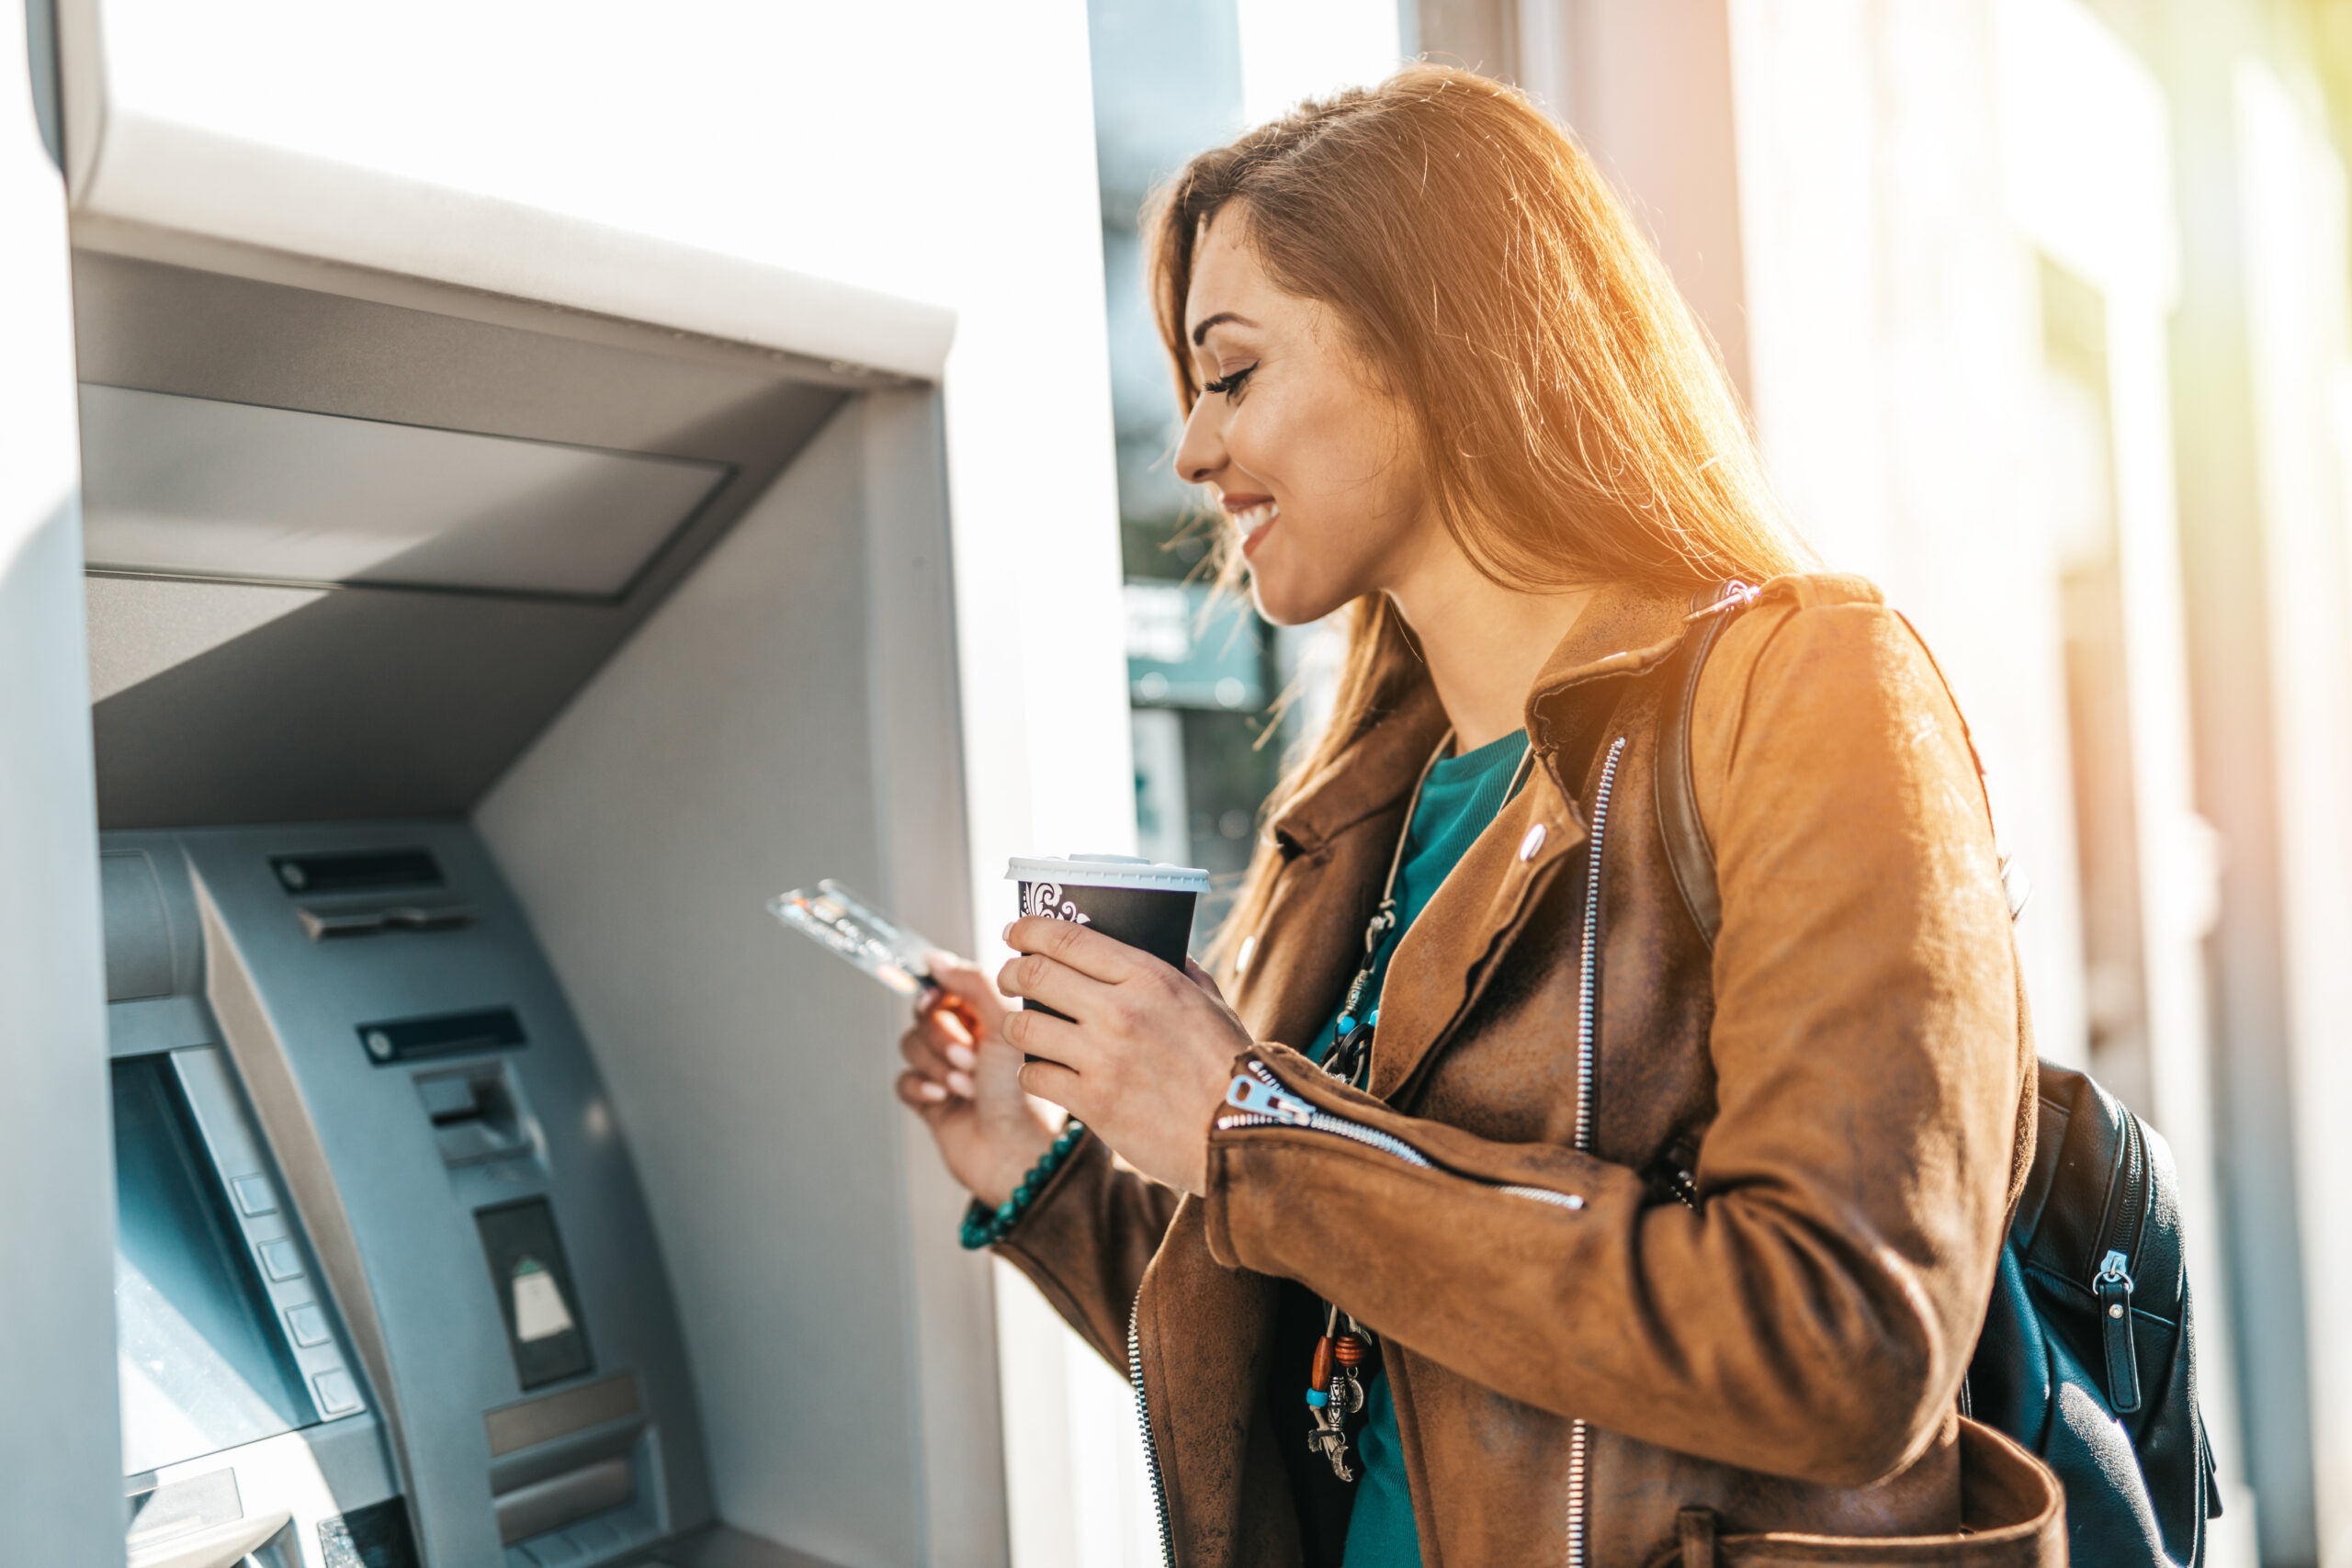 women at an ATM in bank